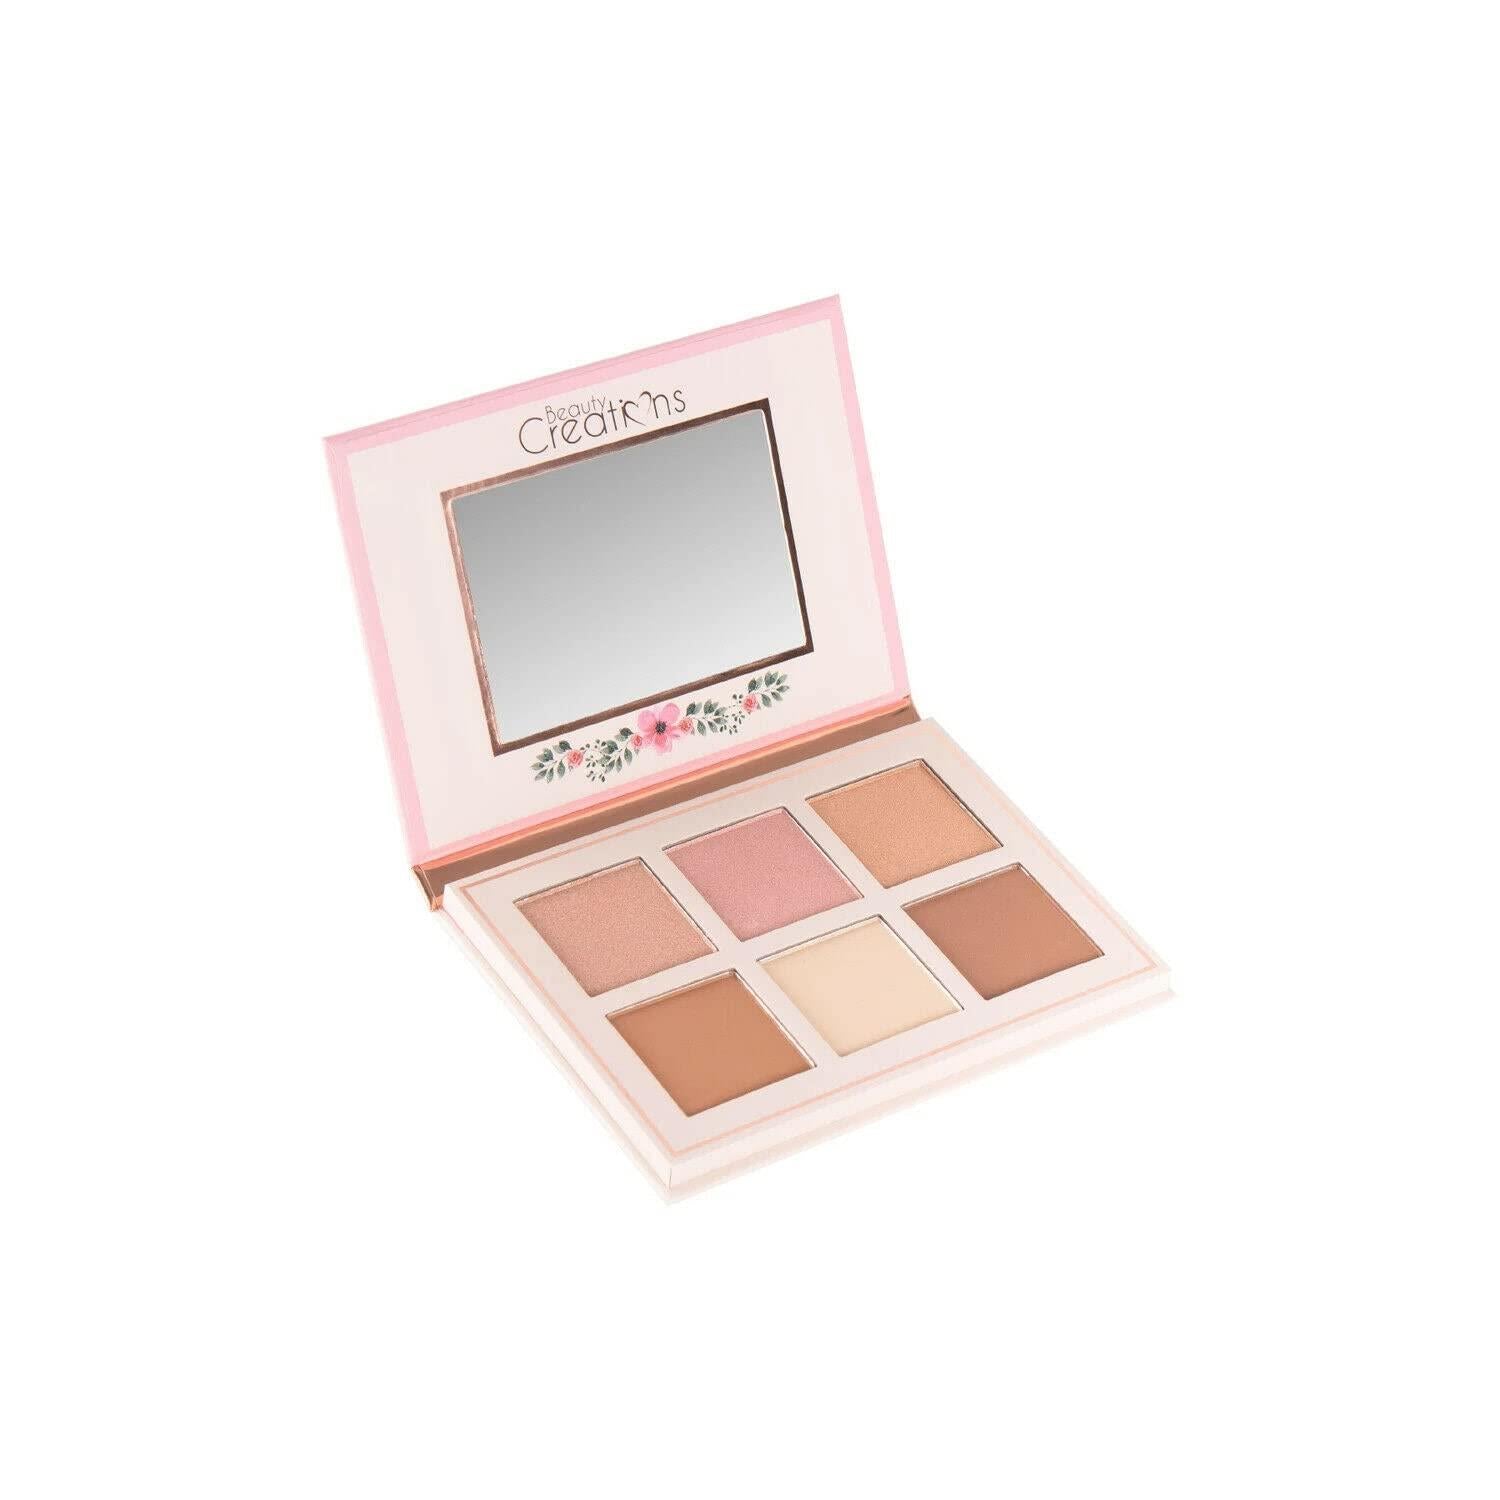 Beauty Creations Floral Bloom Highlight & Contour Kit